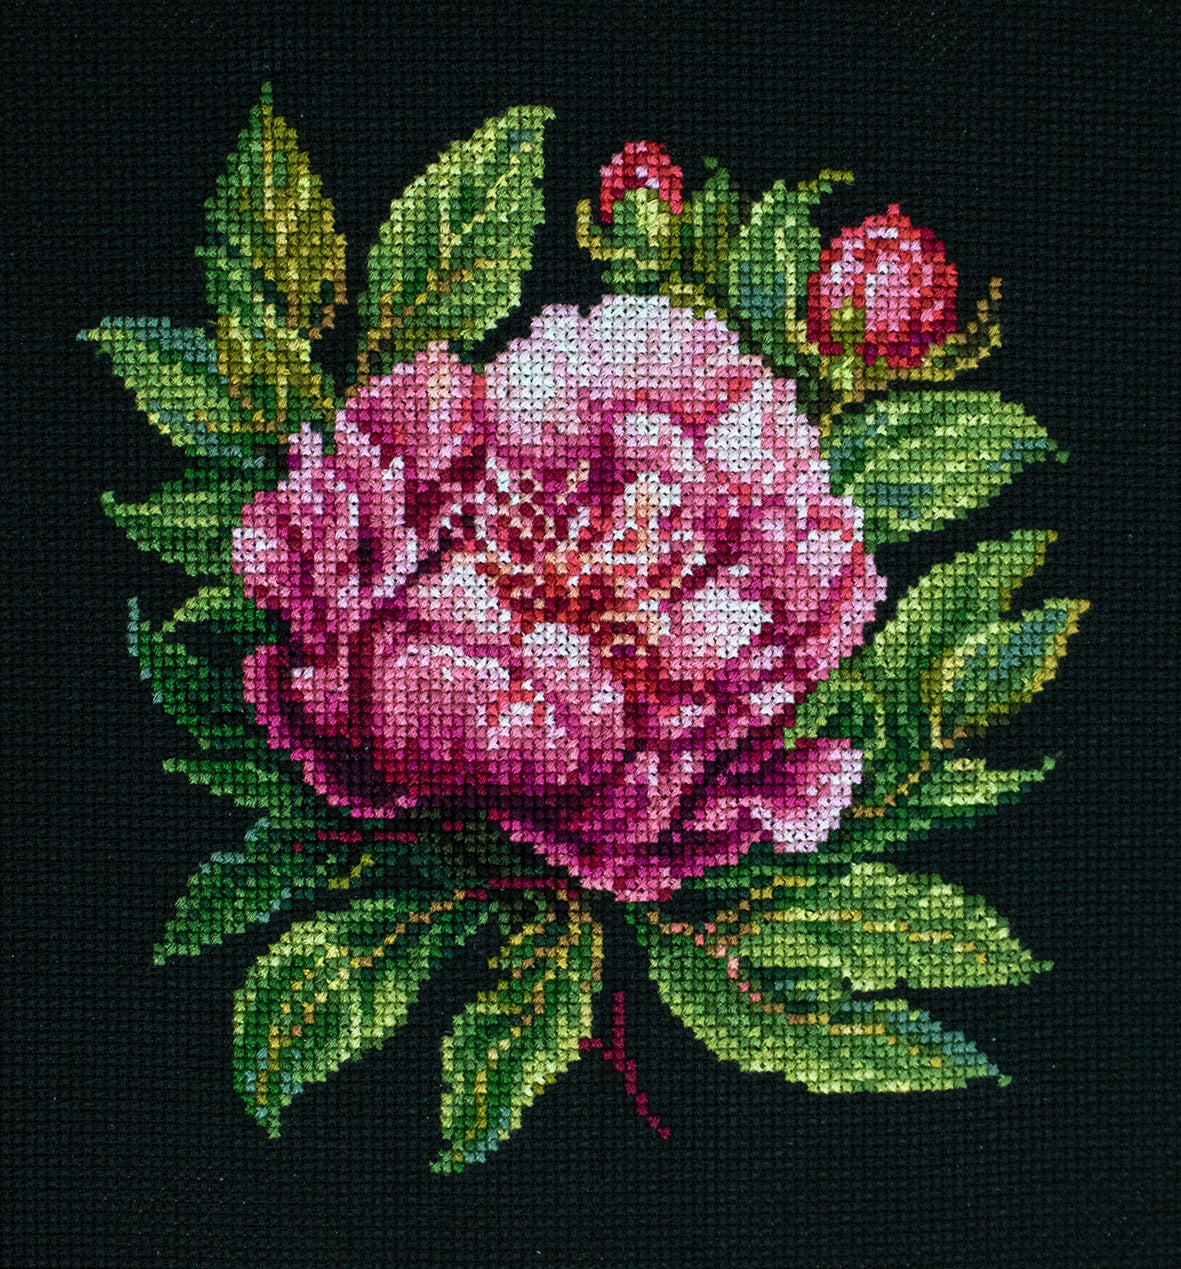 Cross Stitch Kit with Hoop Included Luca-S - ’’Peter Brand’’ Peony, BC204